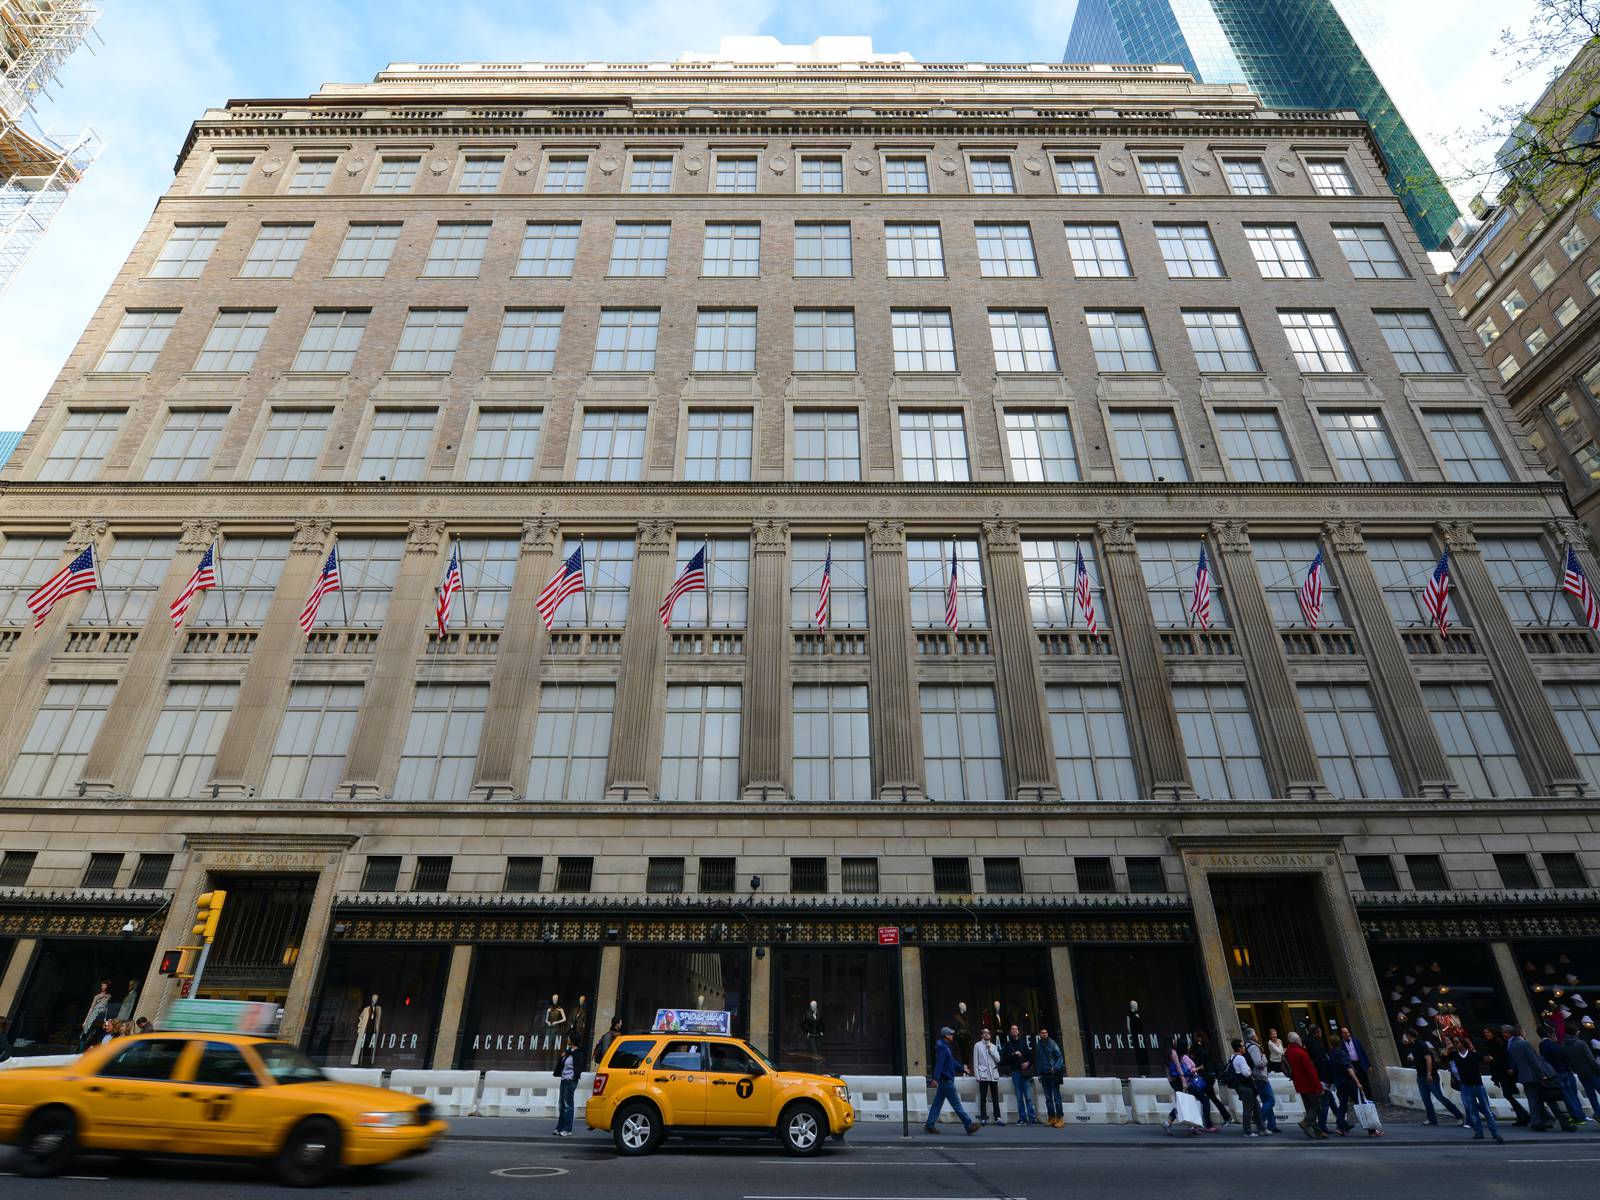 Saks Fifth Avenue Nears Completion of $250 Million Renovation - Bloomberg